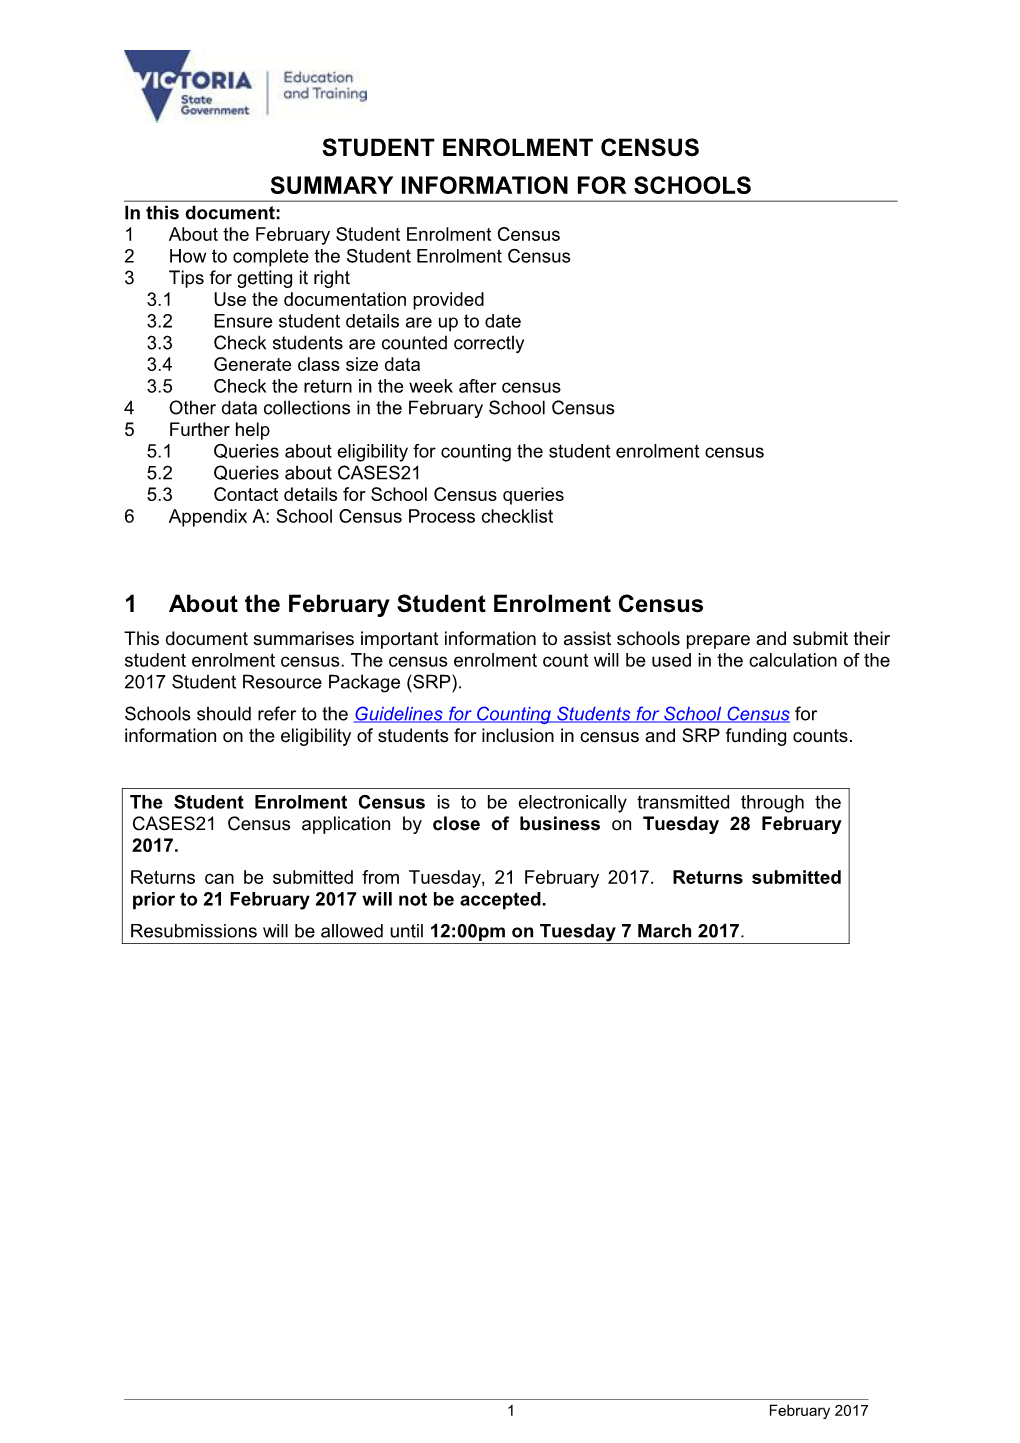 Instructions for February School Census